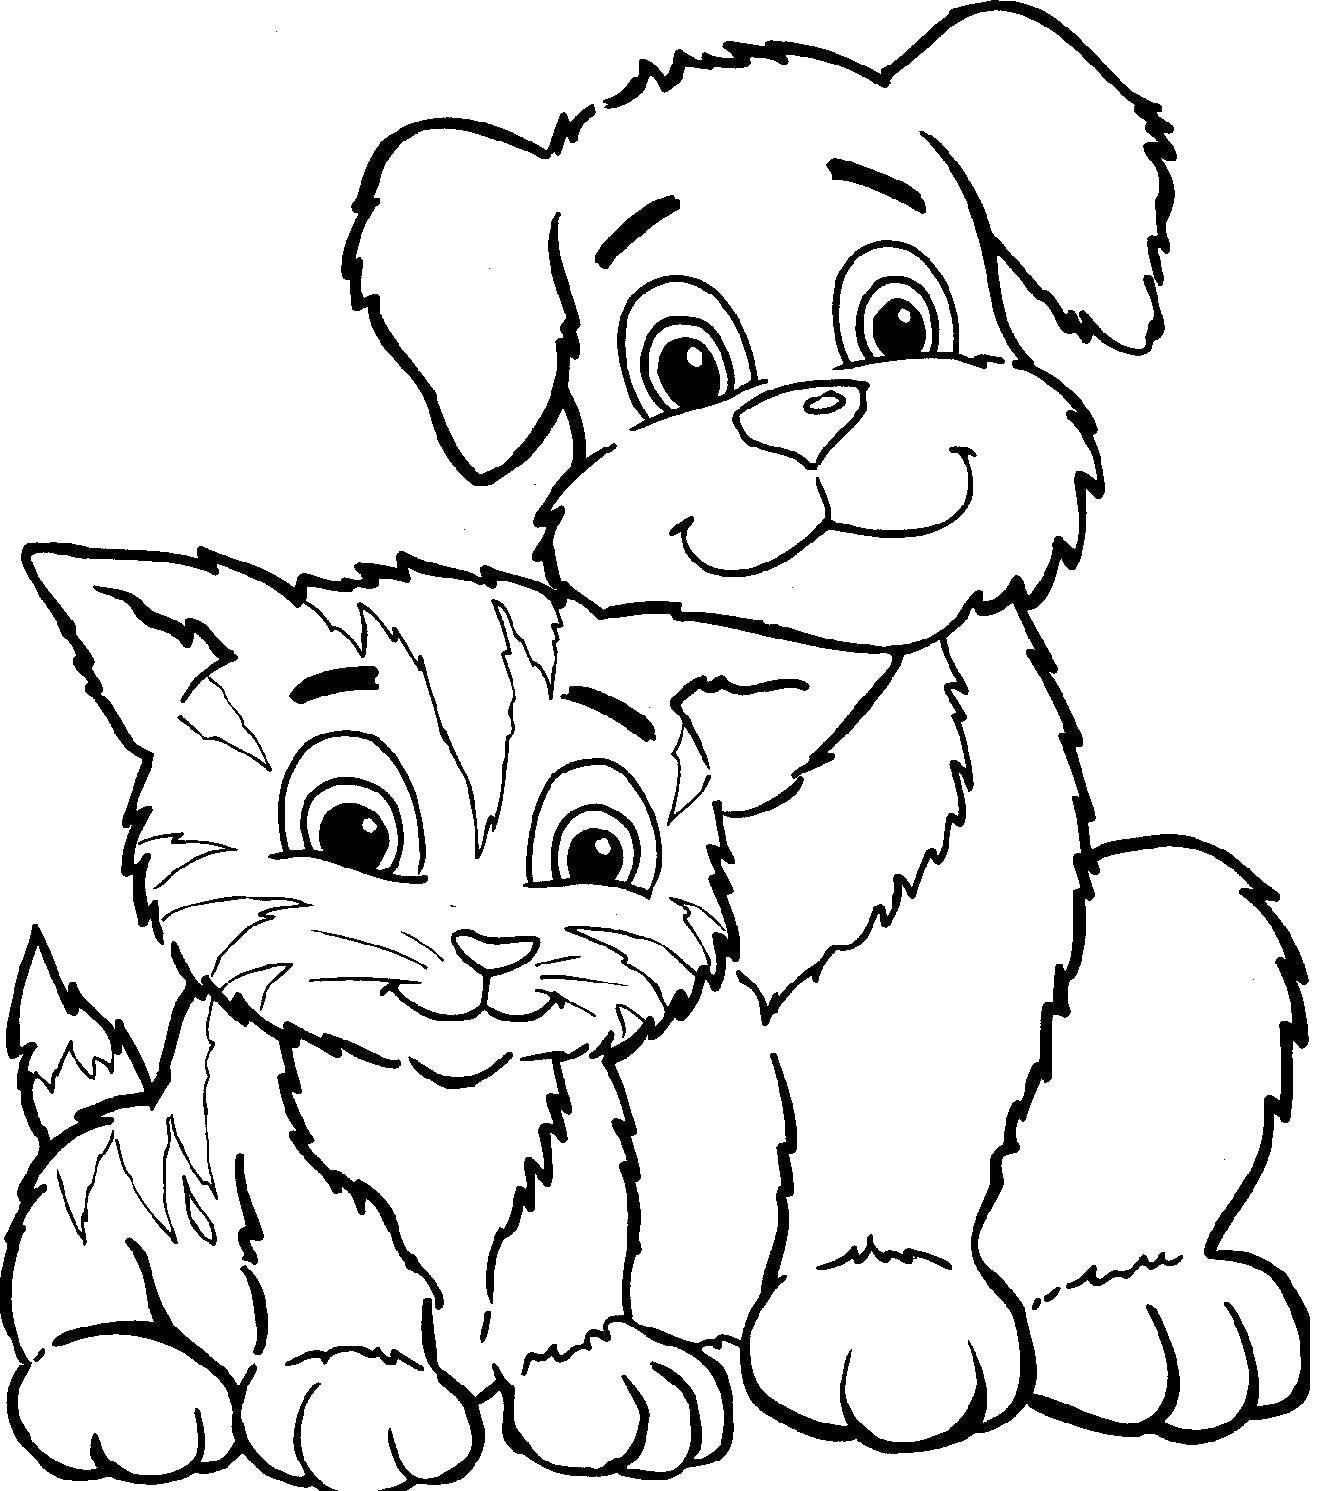 Coloring Kitten and puppy friends. Category Animals. Tags:  Animals, kitten, puppy.